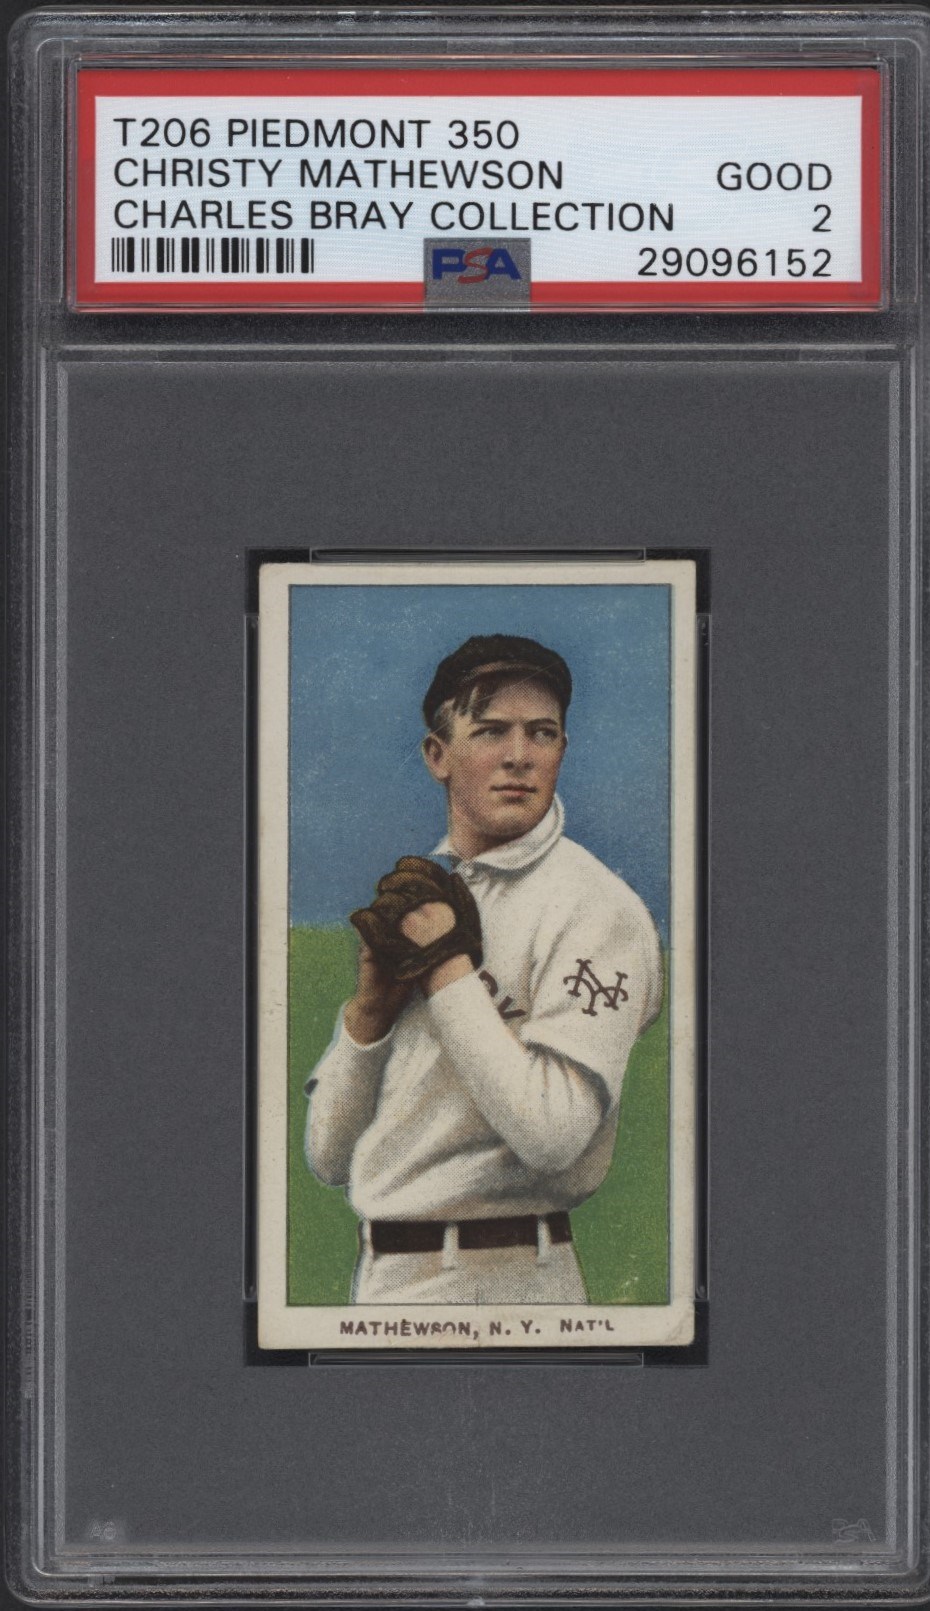 T206 Piedmont 350 Christy Mathewson PSA Good 2 From the Charles Bray Collection